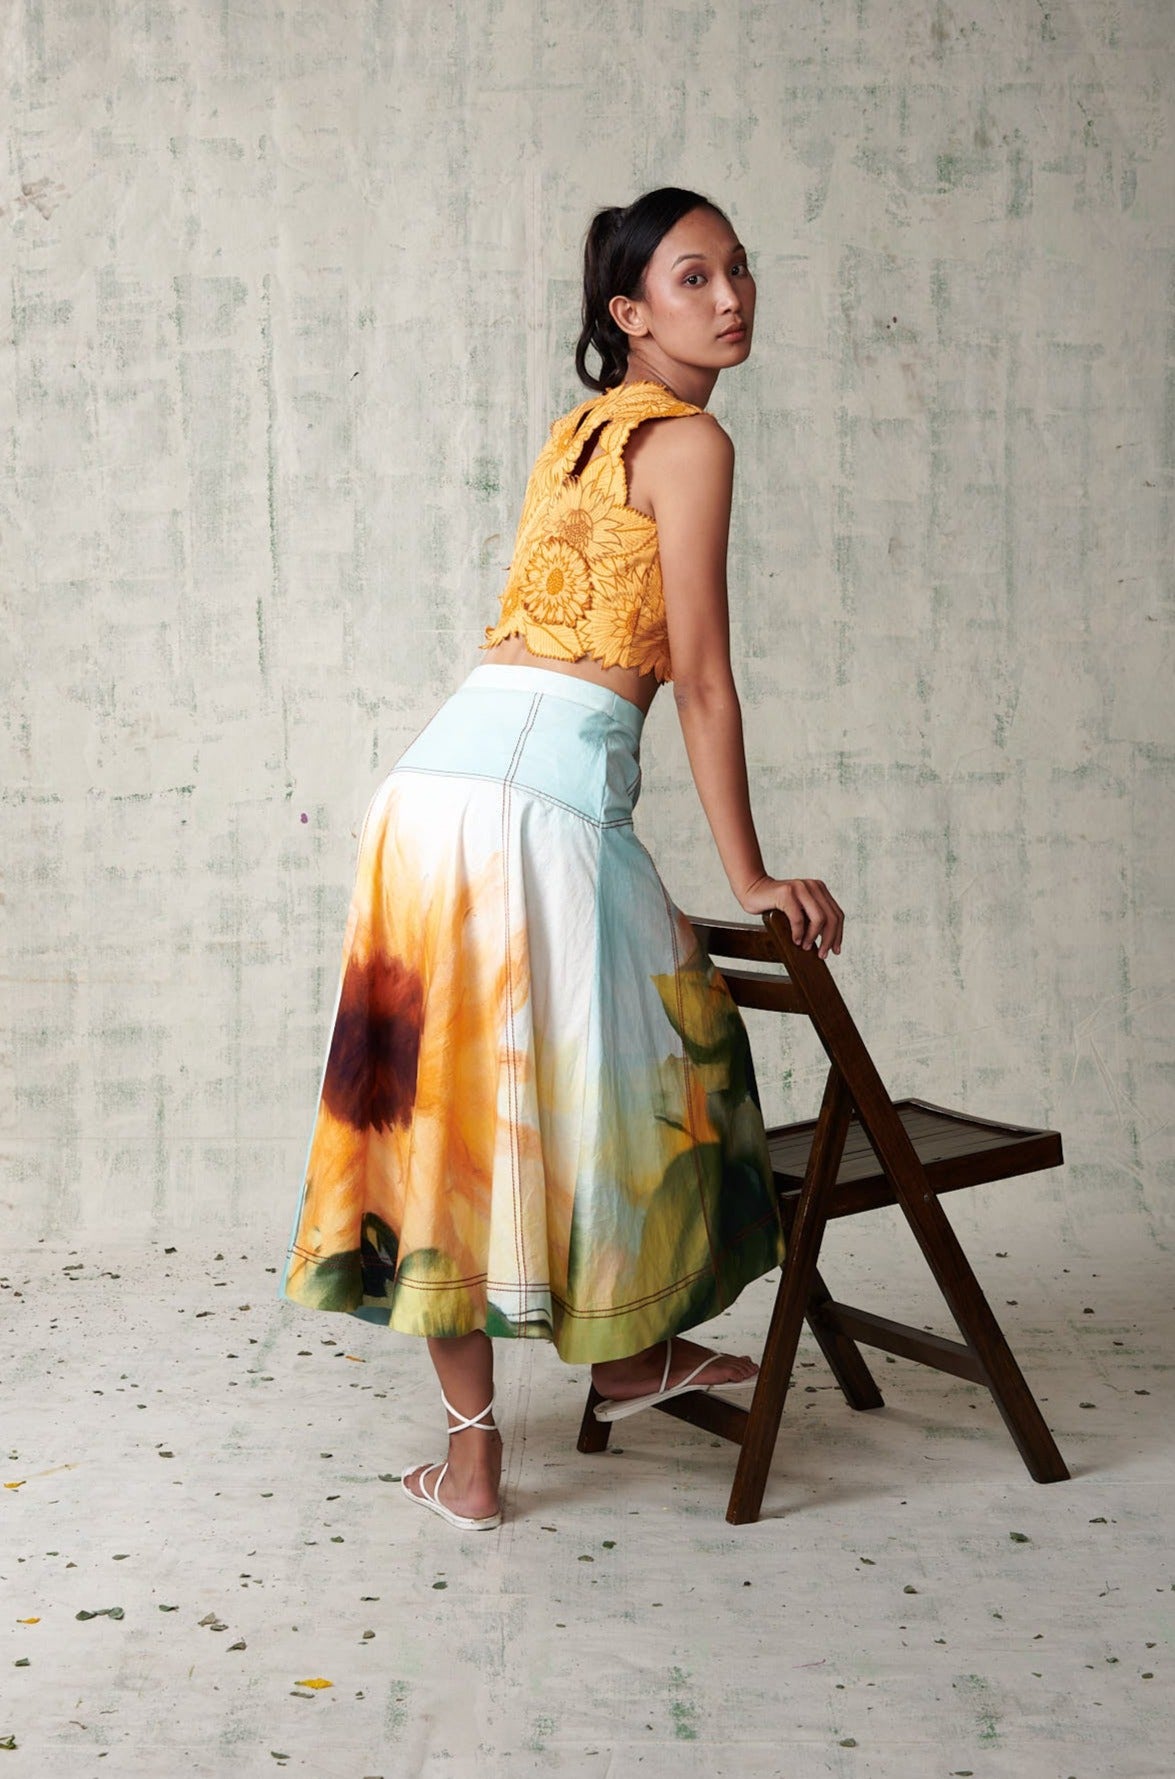 Sunflower Embroidered Top With Printed Skirt